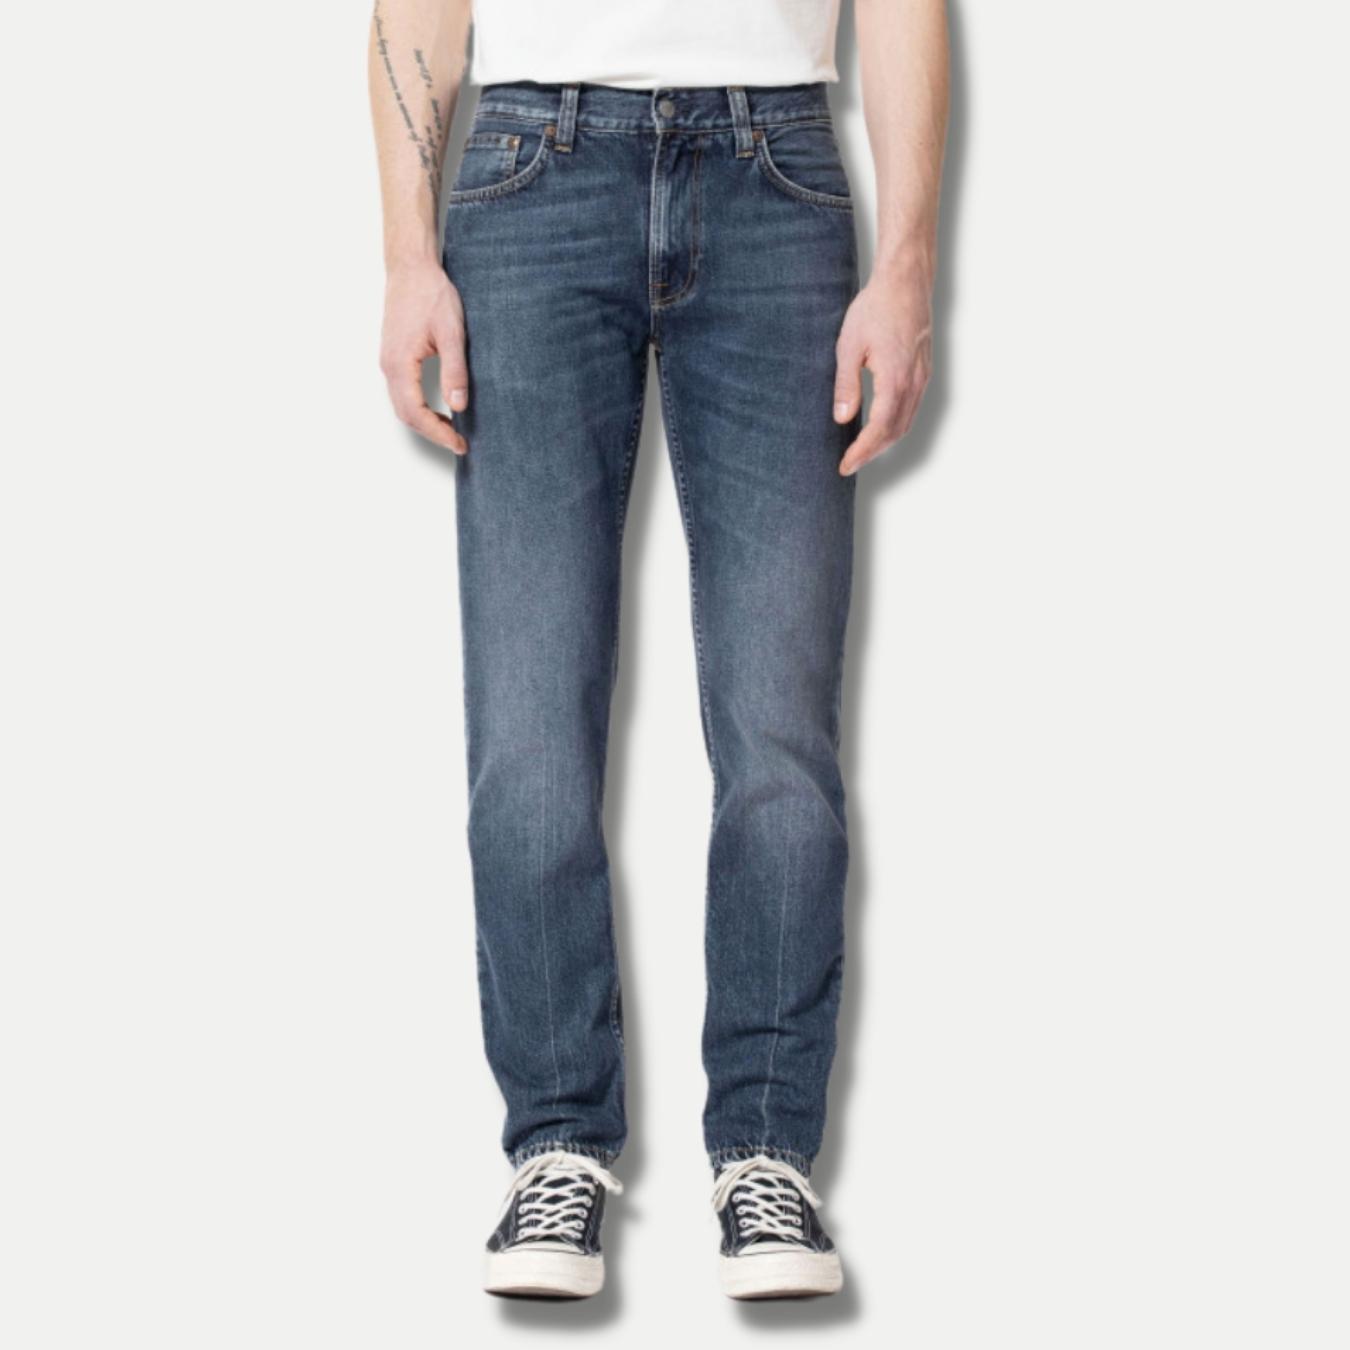 Gritty Jackson-Press Creased | Nudie Jeans